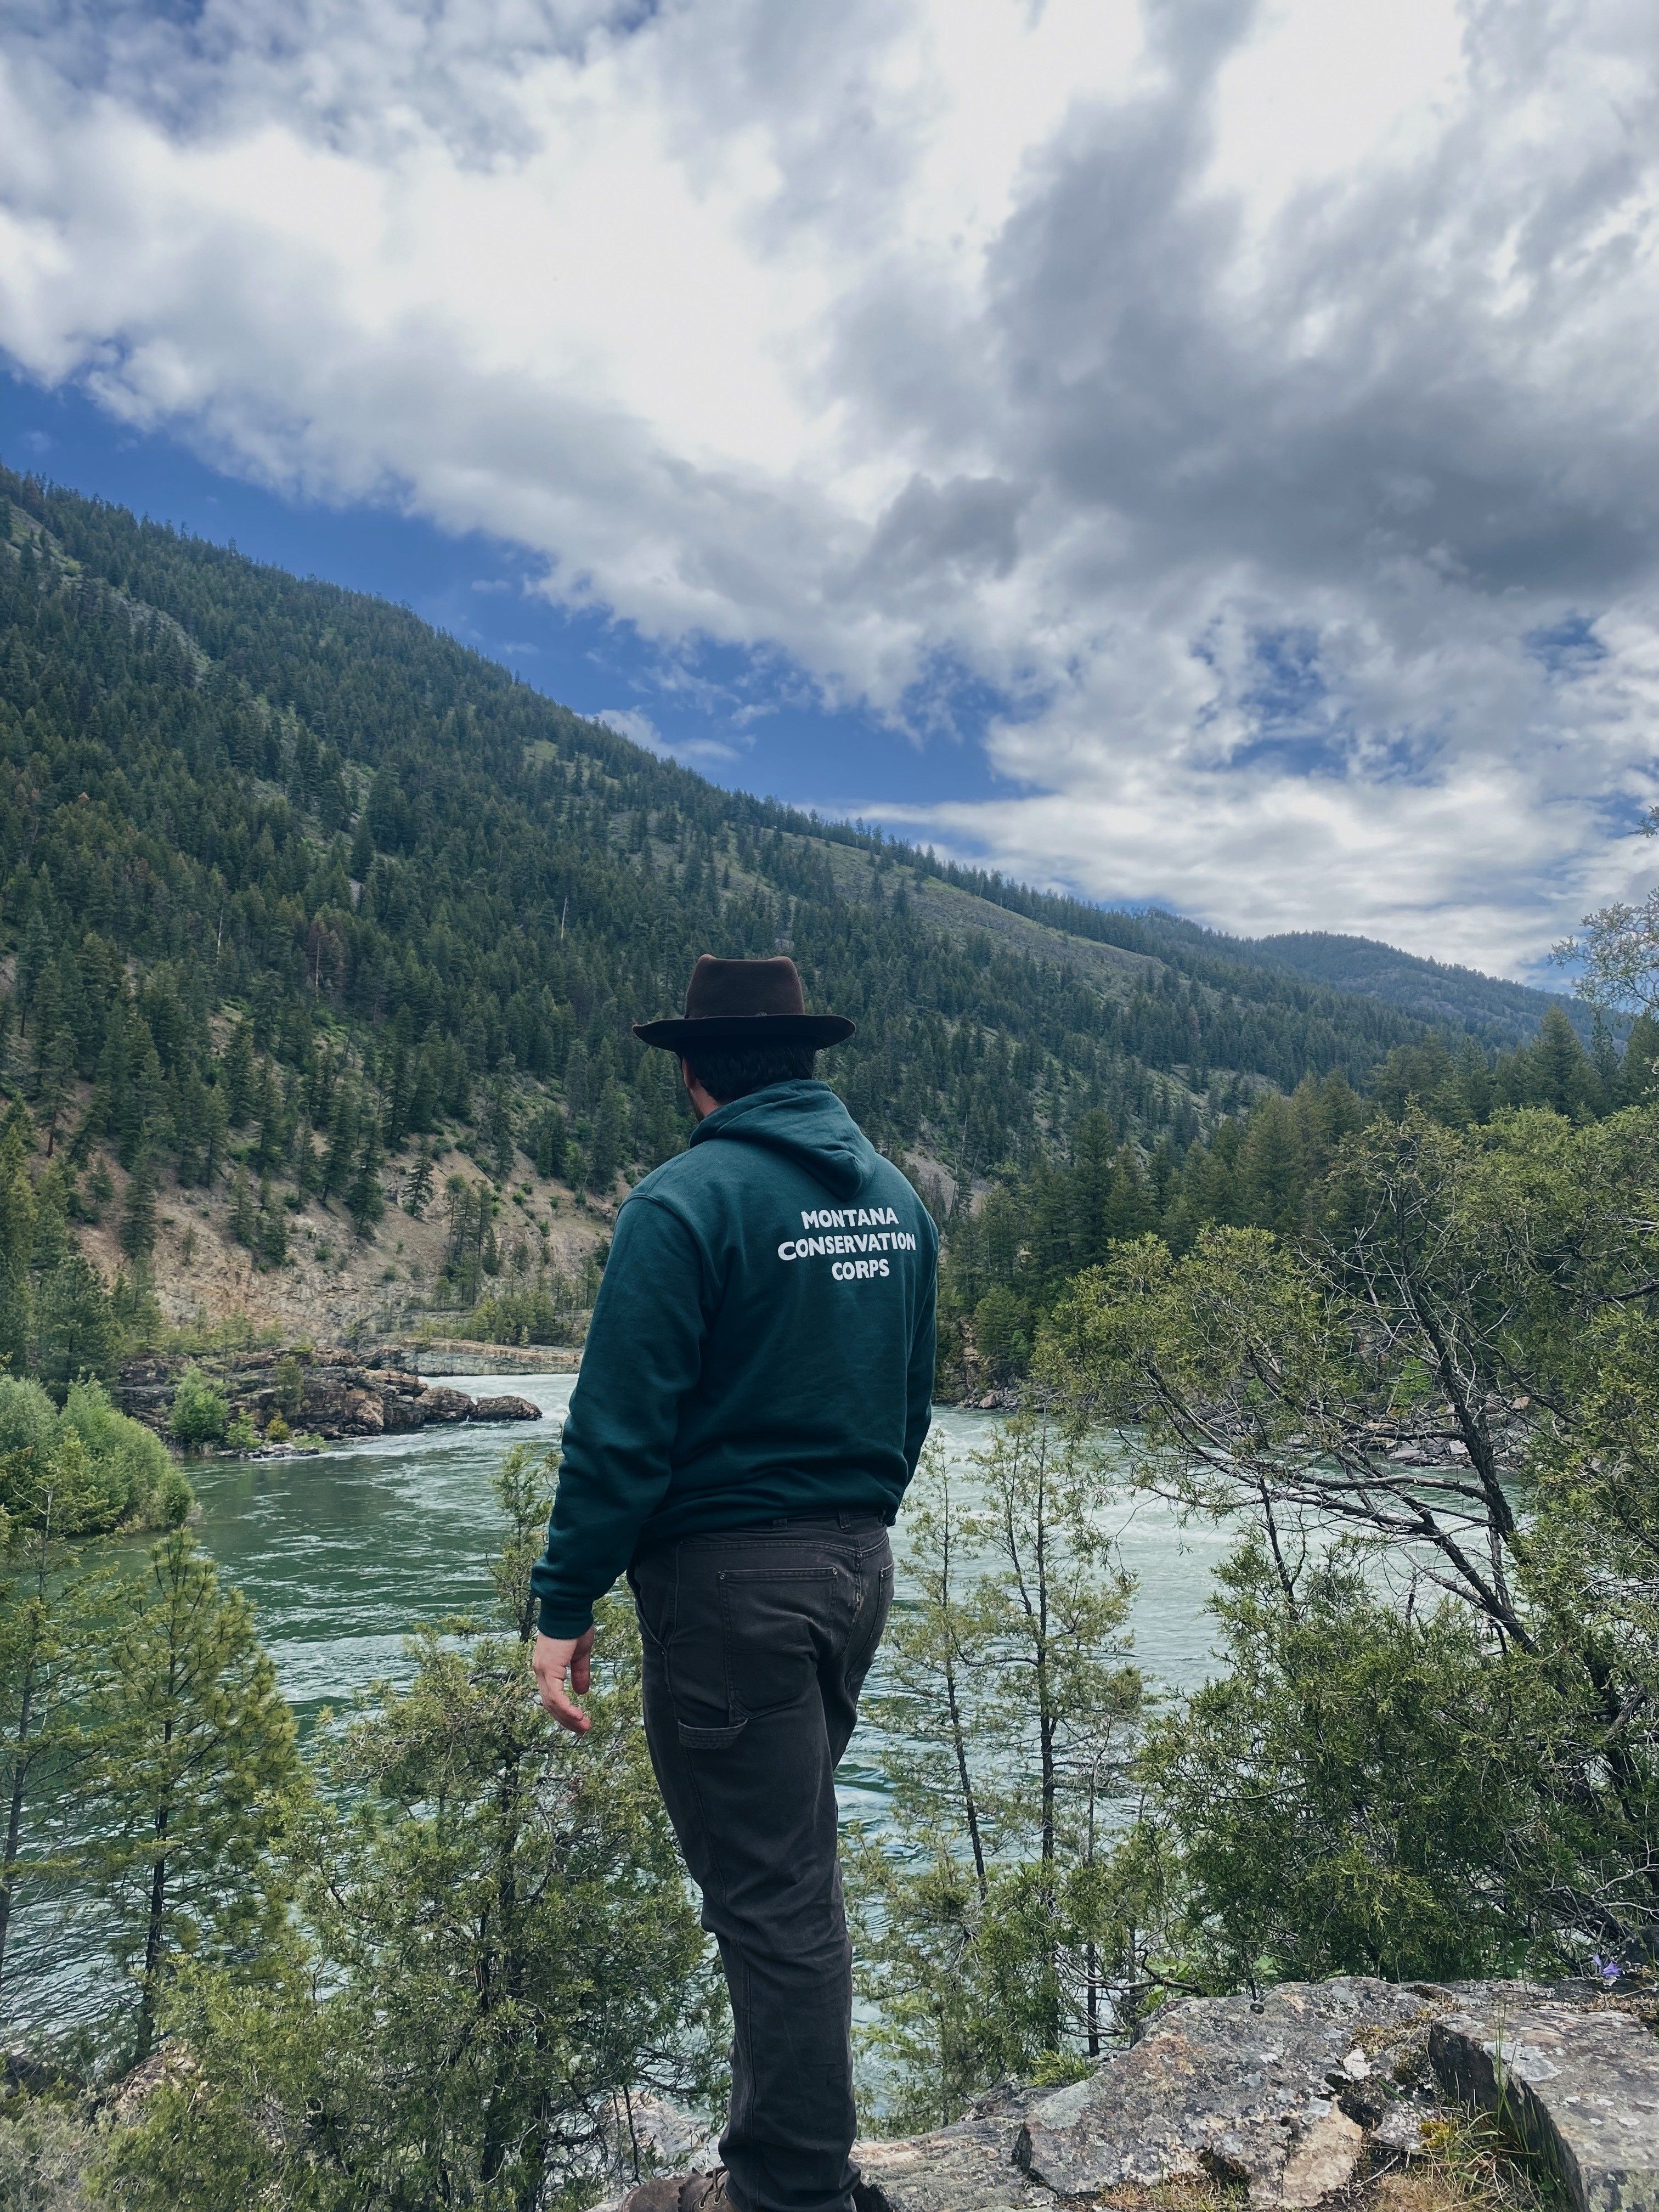 A person wearing a black cowboy hat stands with their back to the camera, overlooking a beautiful river and forested mountainside.